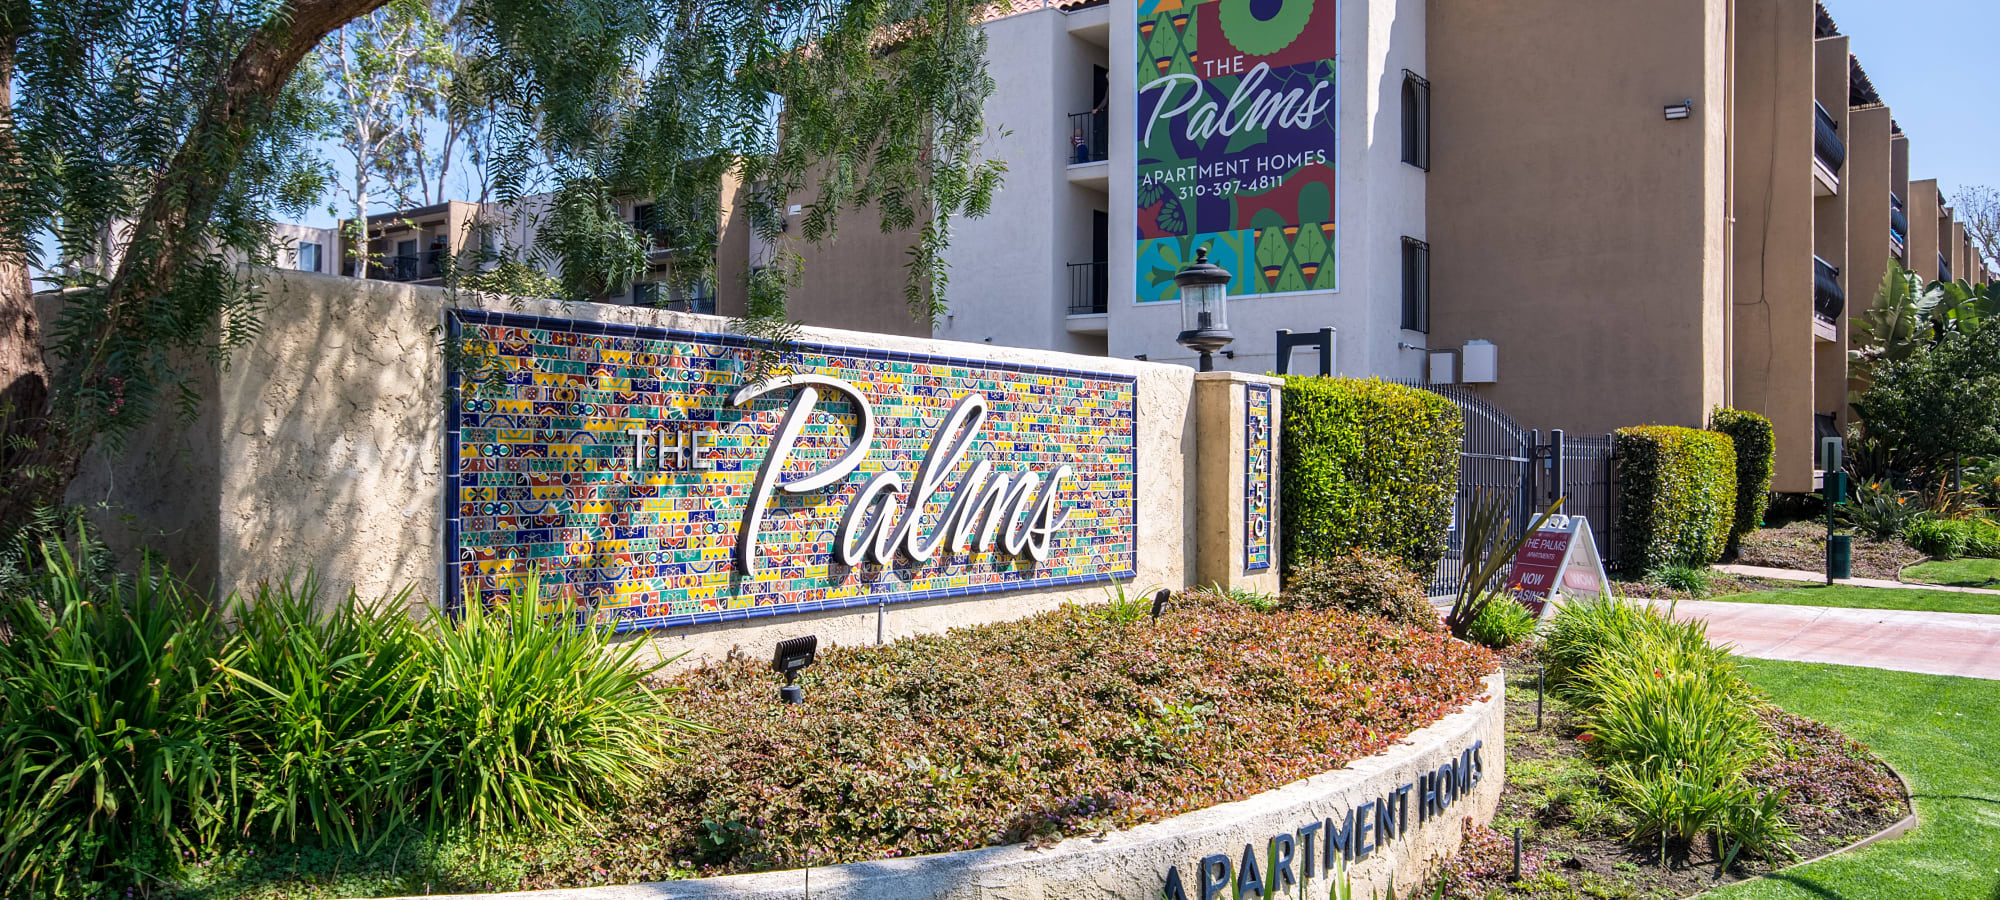 Exterior building sign at The Palms, Los Angeles, California